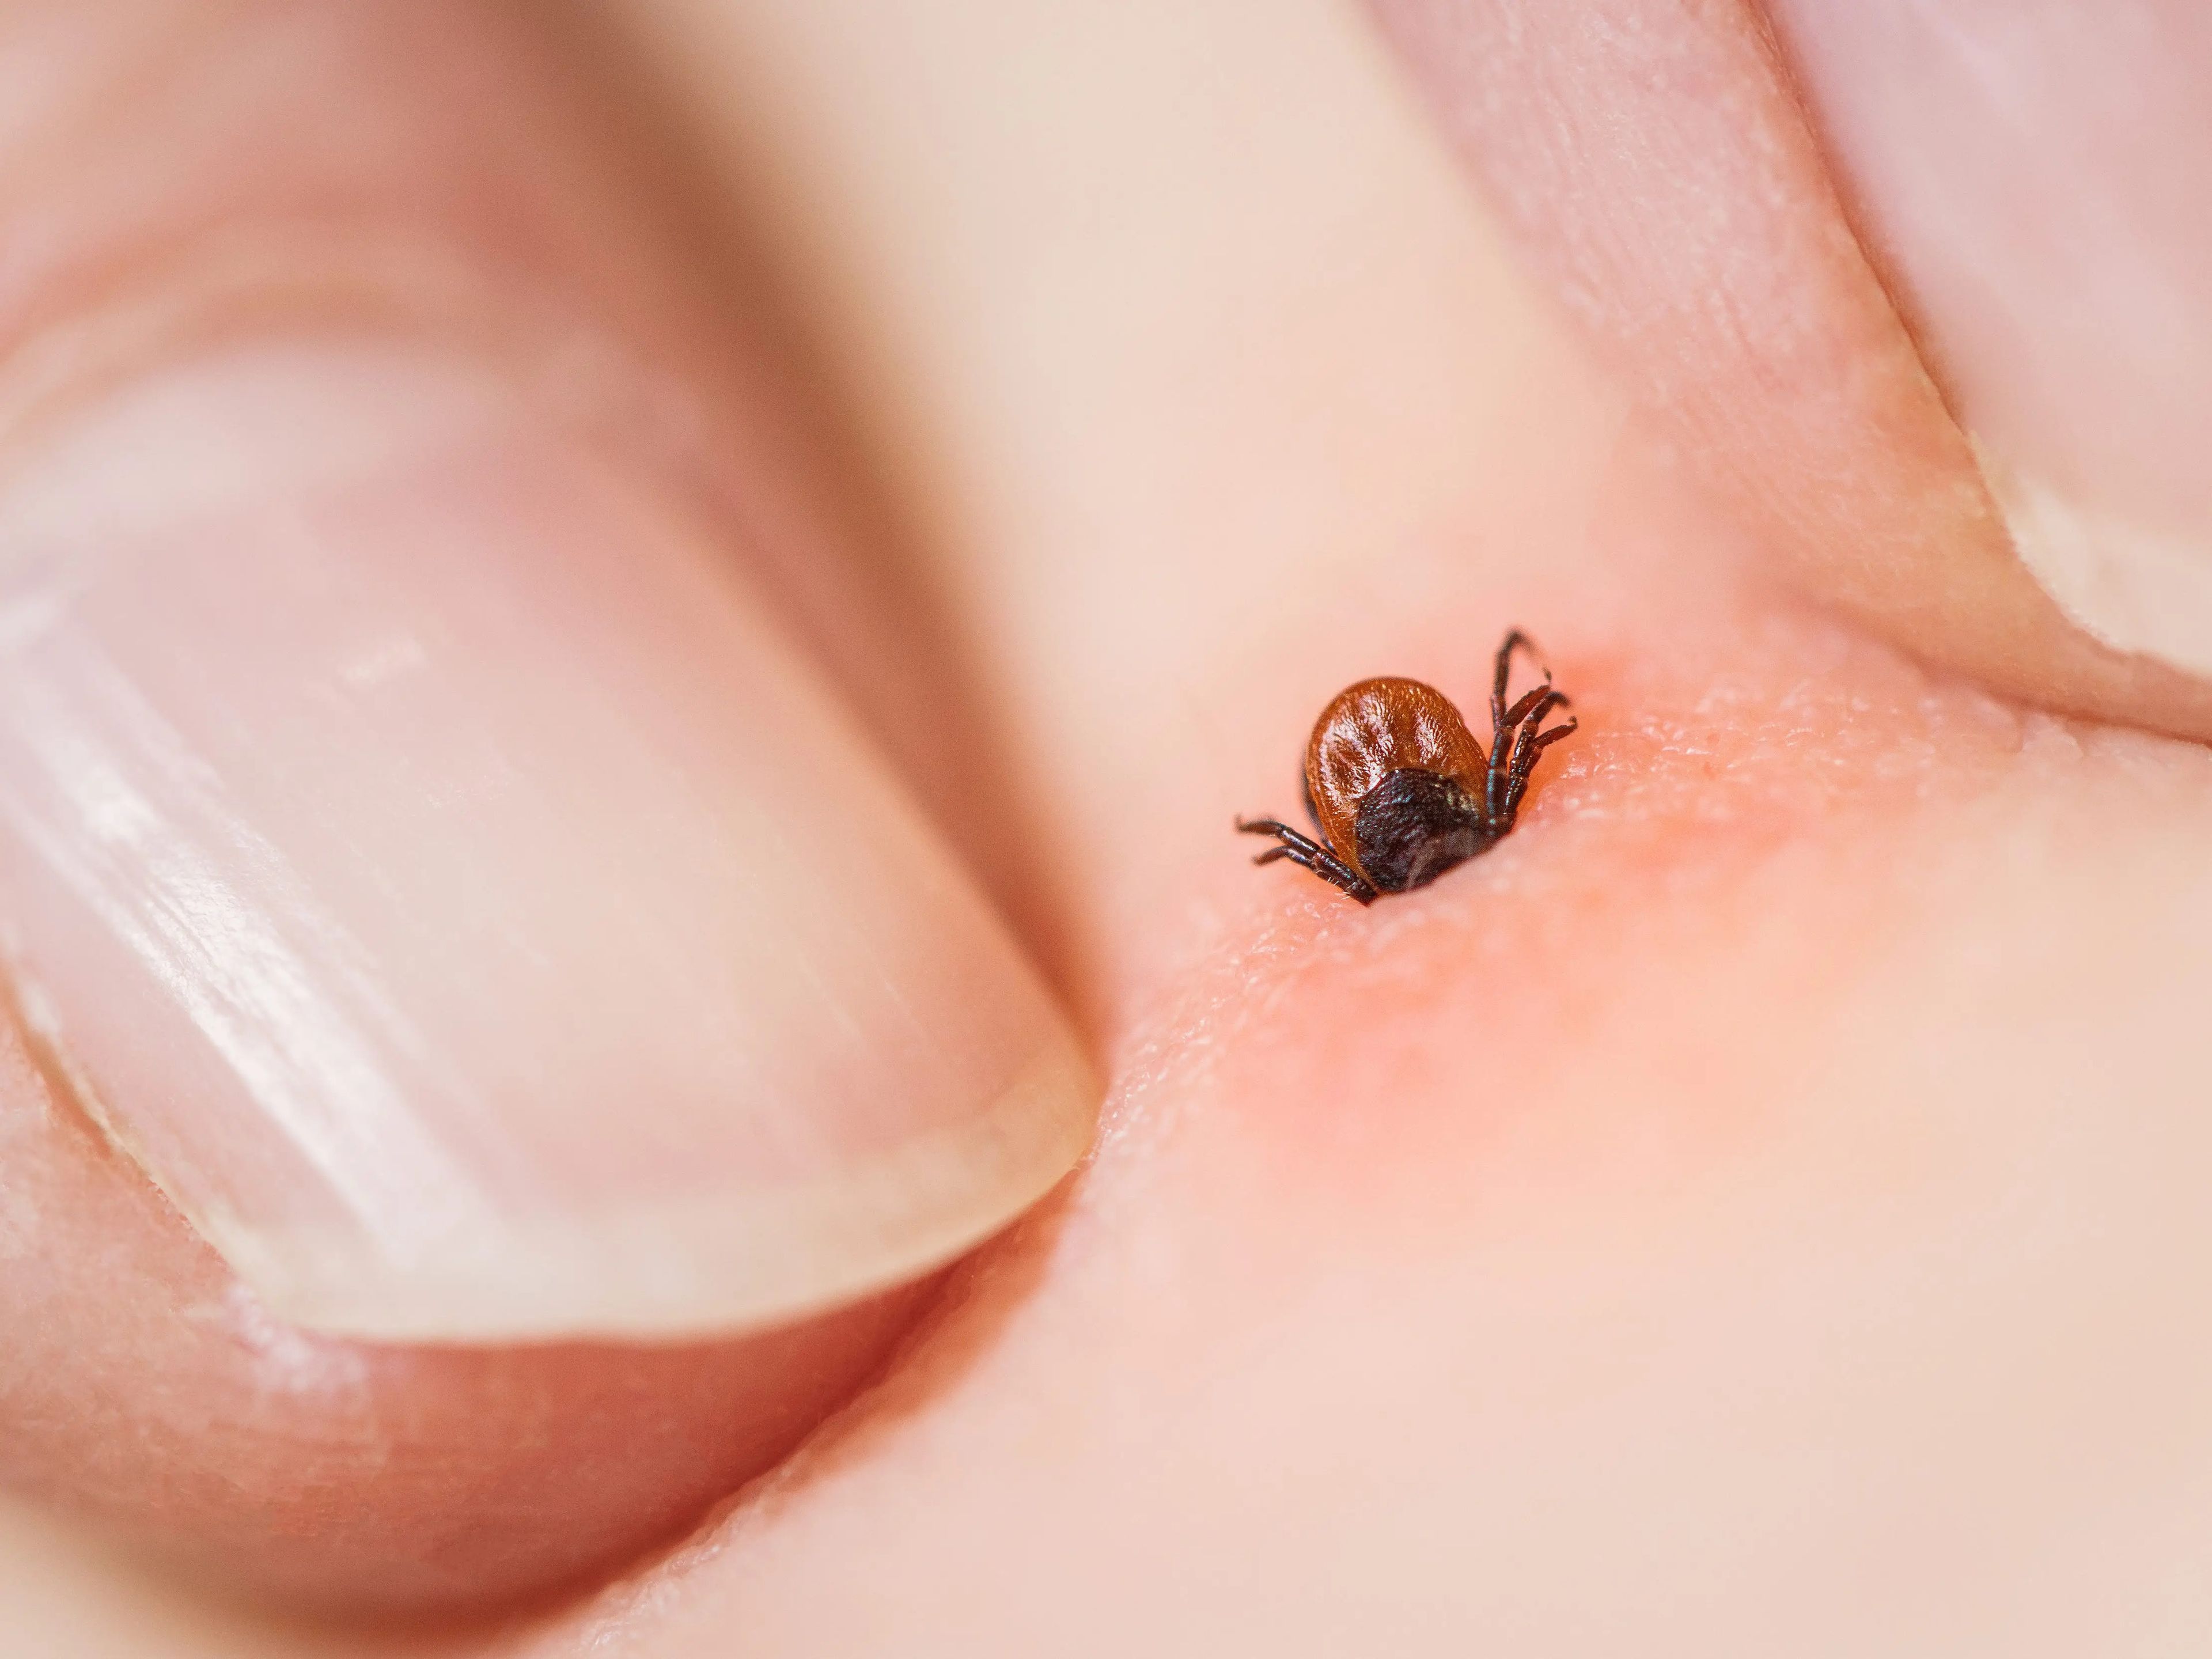 Close-up of a tick attached to a person.touching the skin on either side of the tick with your fingers